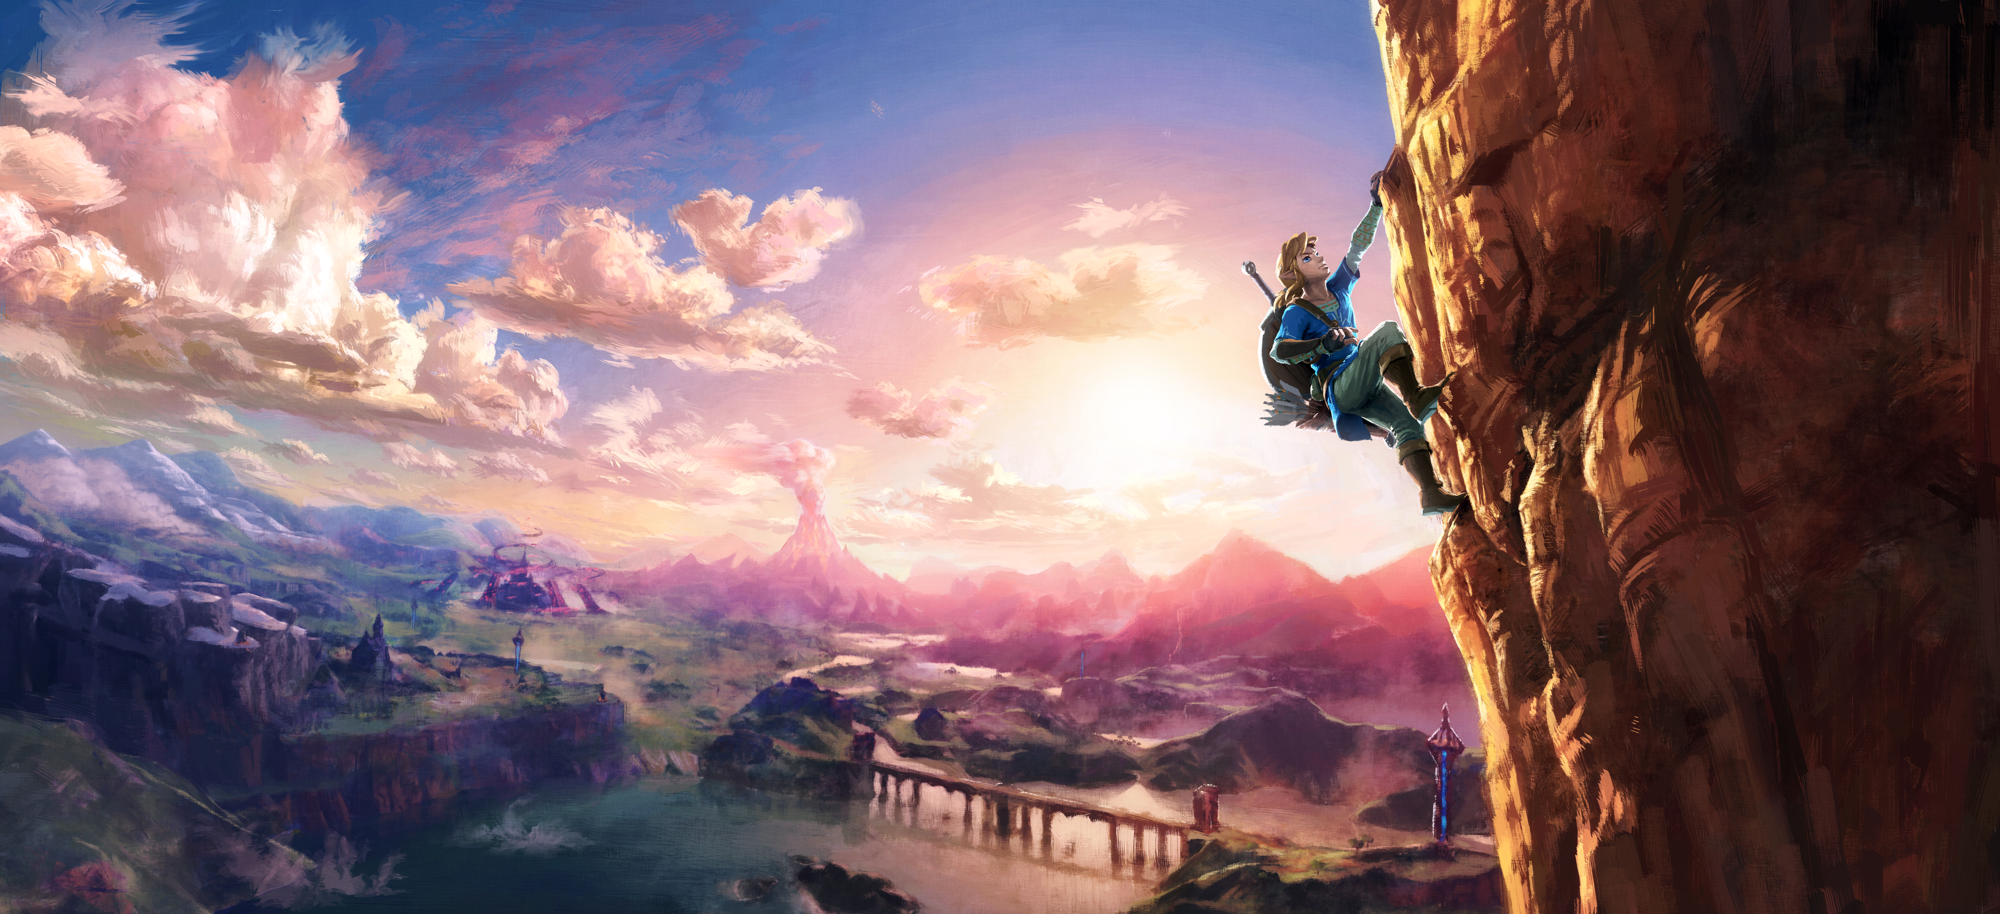 'Breath of the Wild' is the boldest 'Zelda' game in years